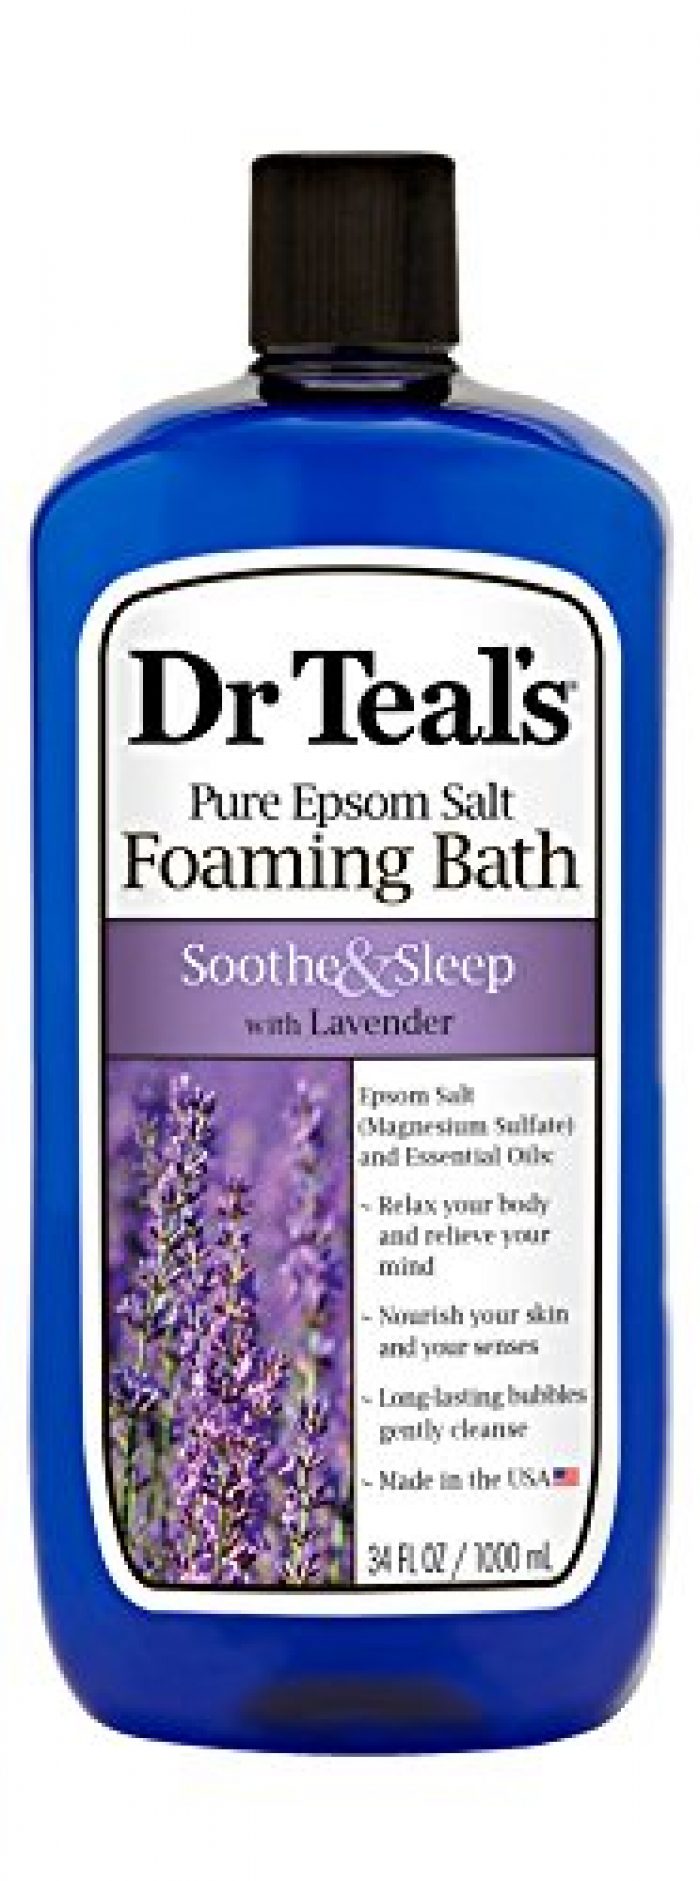 Dr Teal's Foaming Bath with Pure Epsom Salt, Soothe & Sleep with Lavender, 34 fl oz (Packaging May Vary) 1